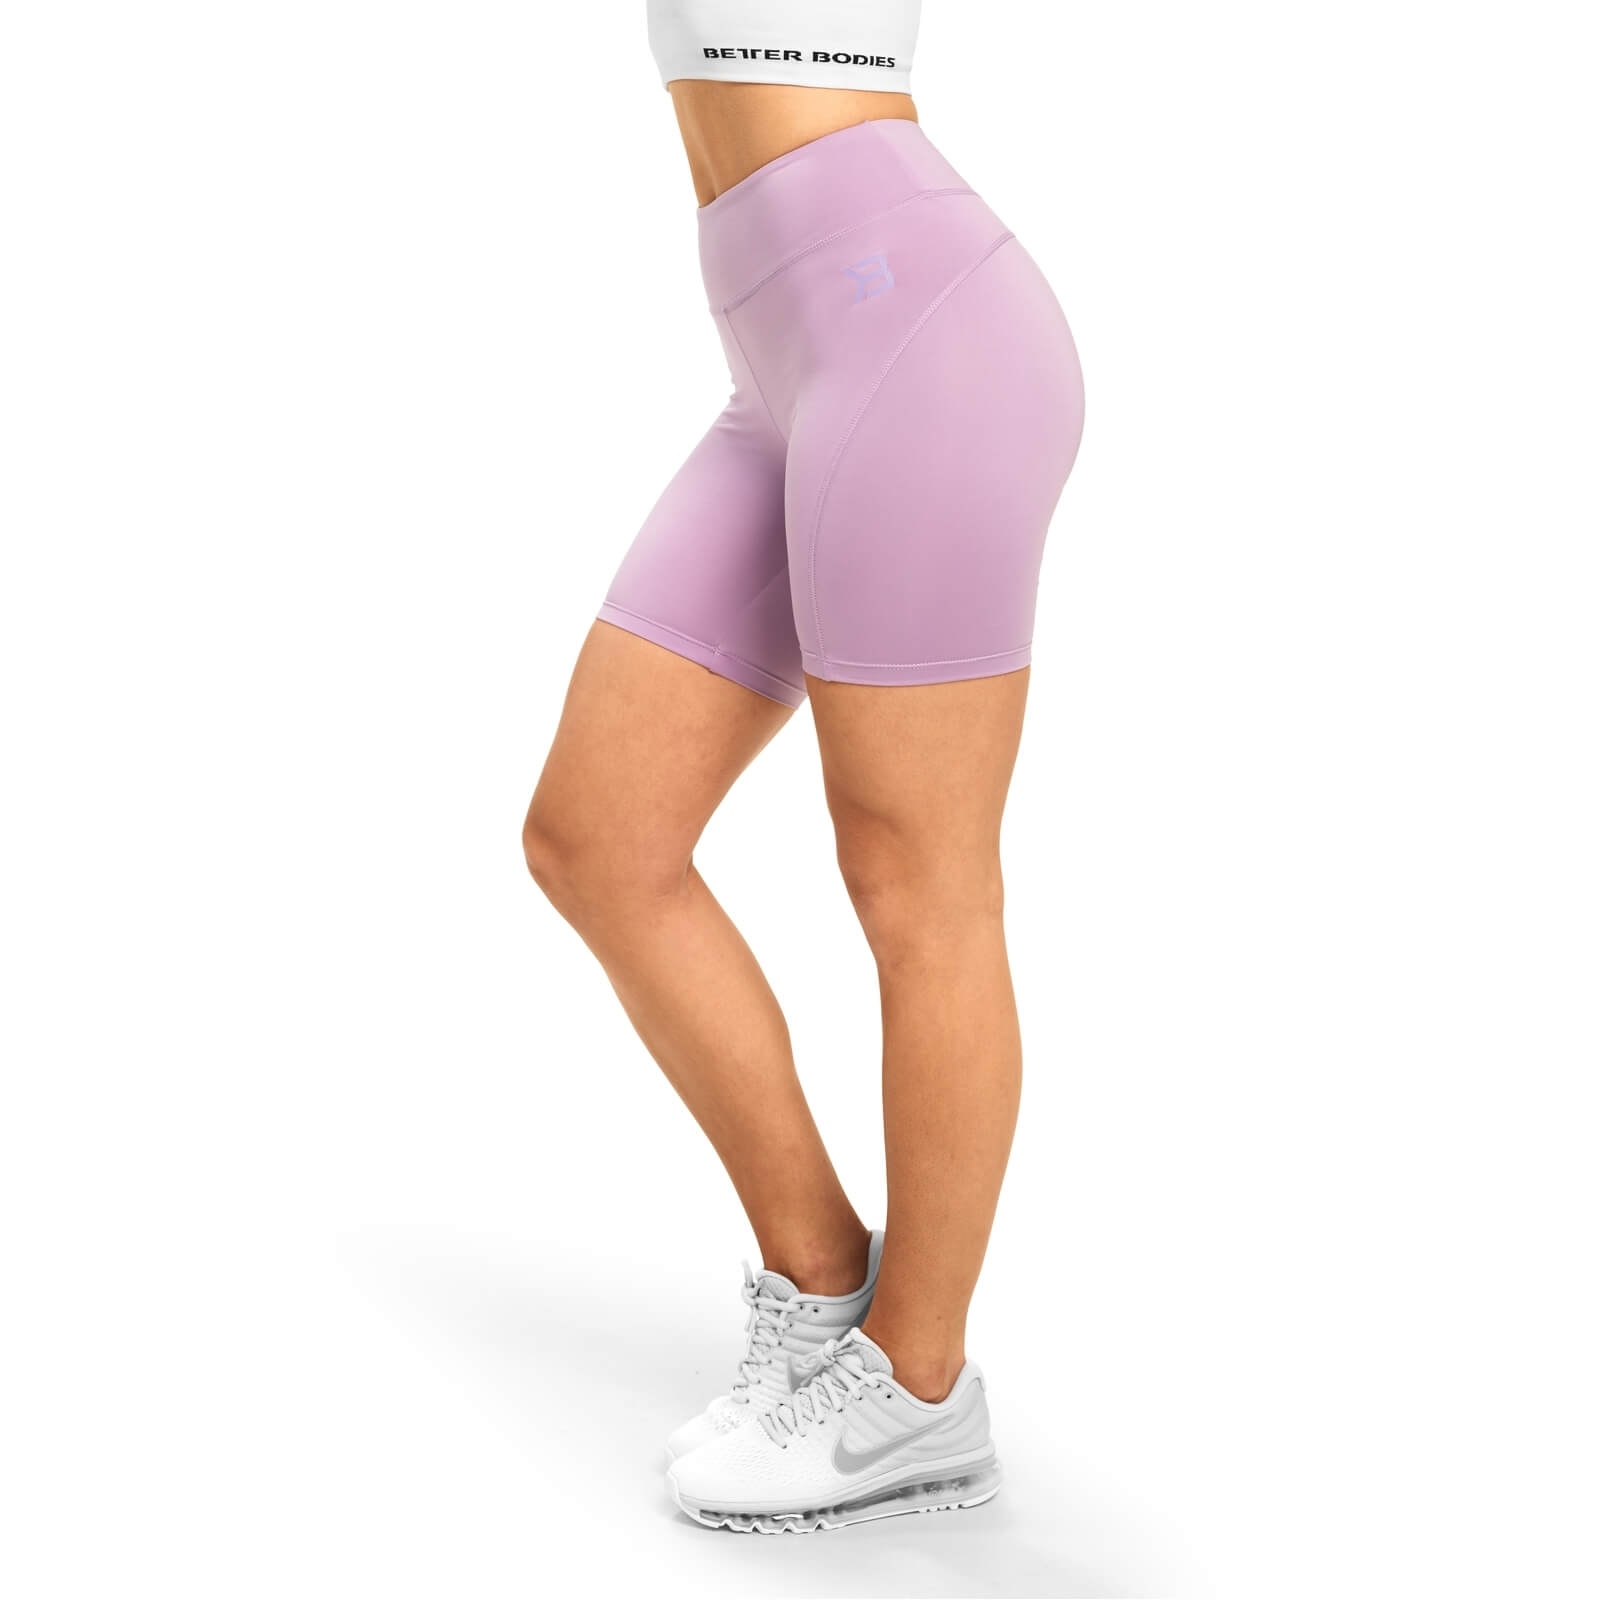 Chrystie Shorts, lilac, Better Bodies